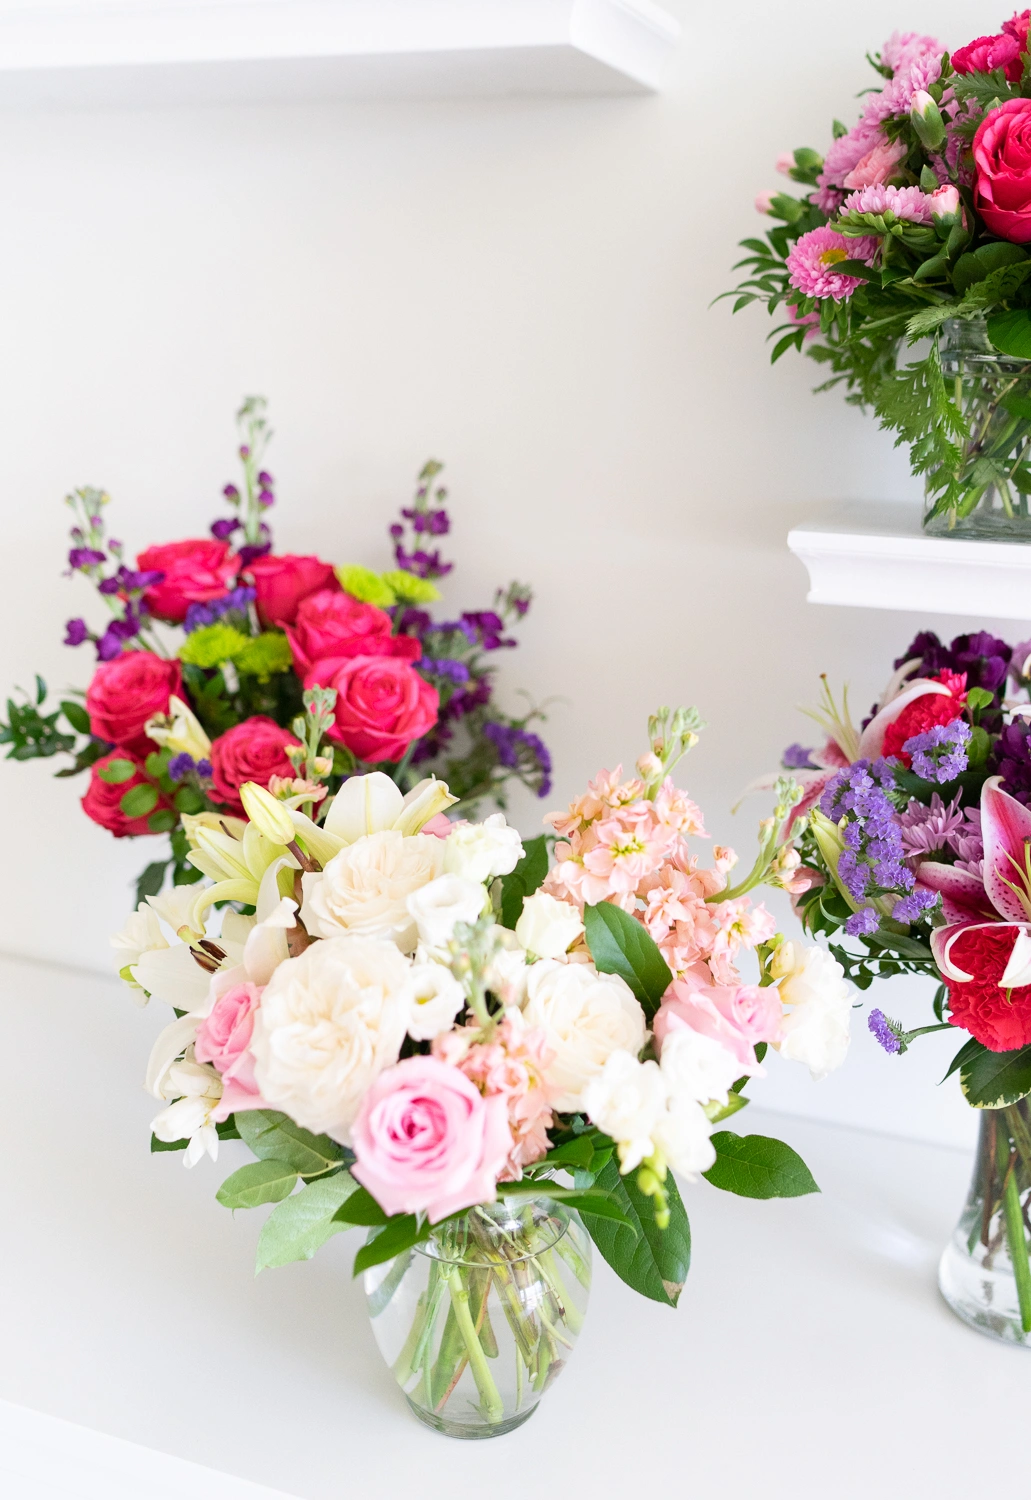 Top 10 Mother's Day Flowers